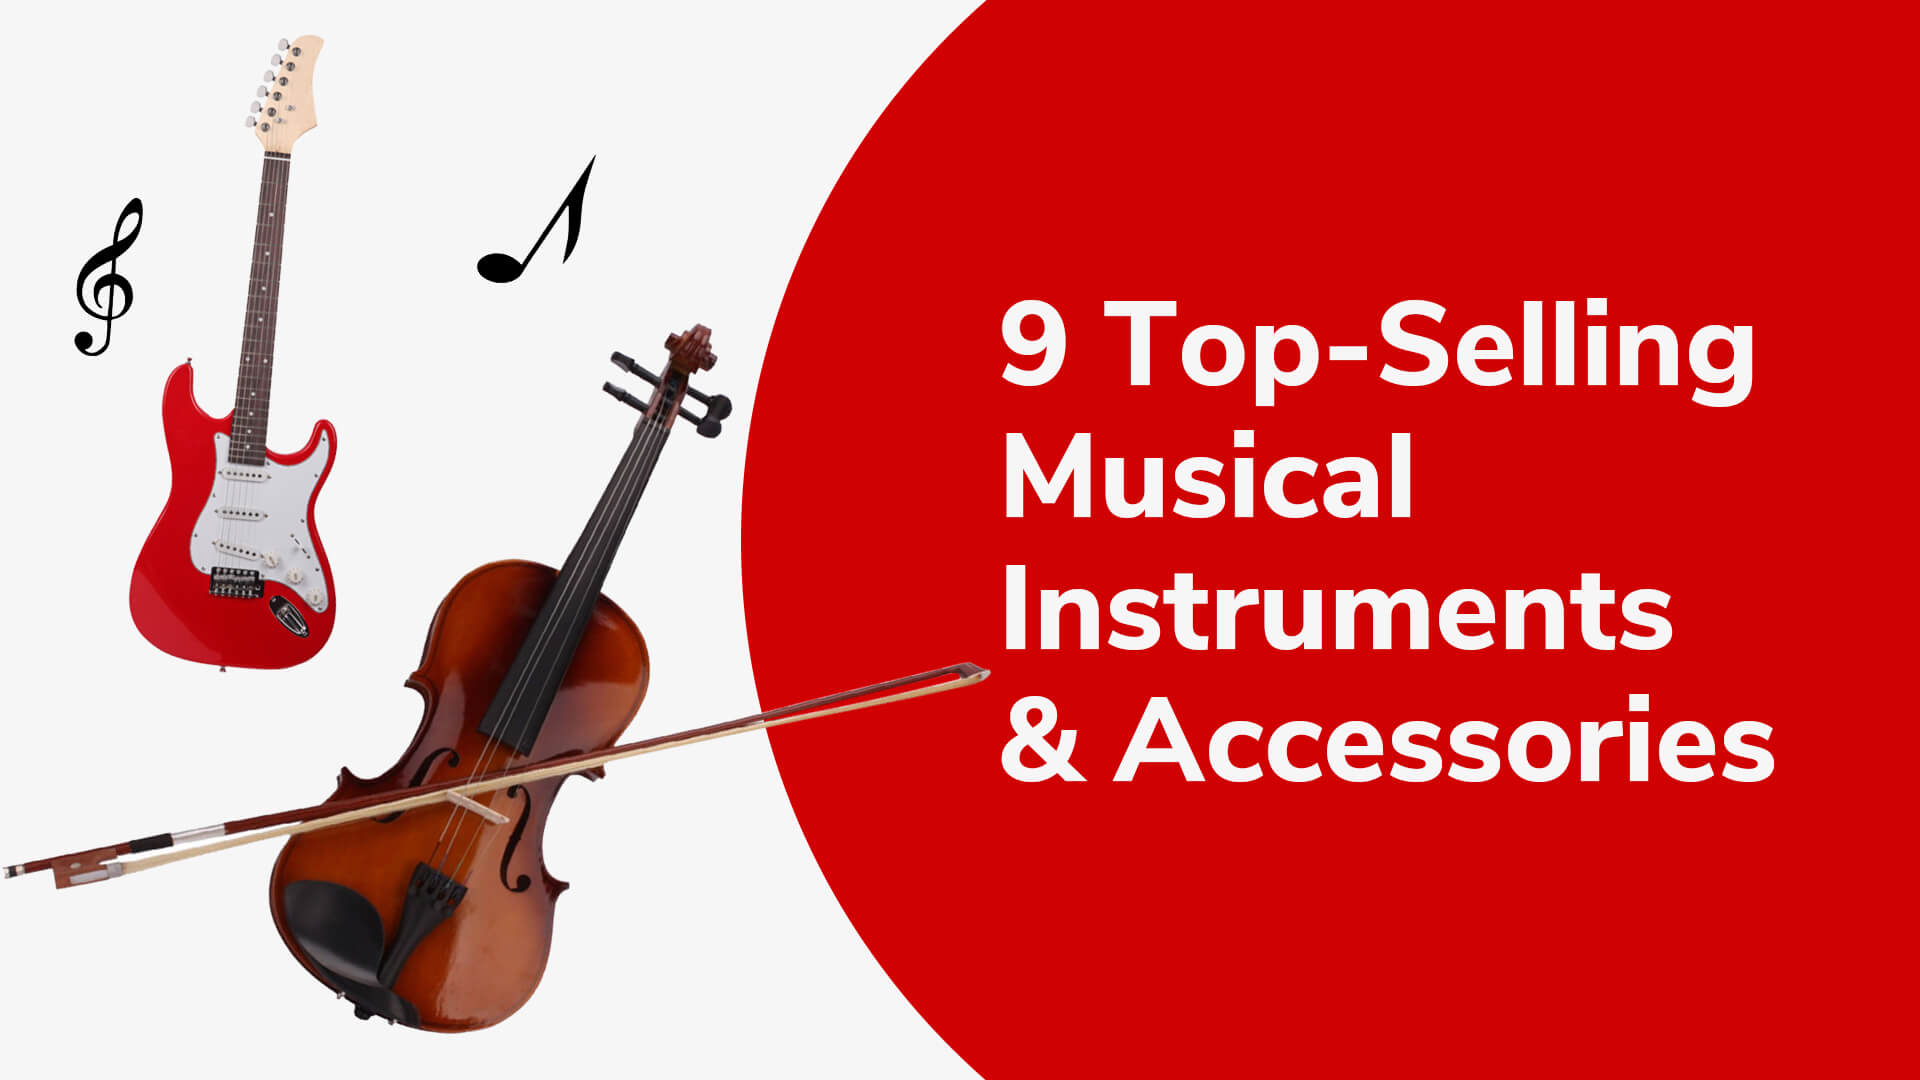 9 Top-Selling Musical Instruments & Accessories for Dropshipping